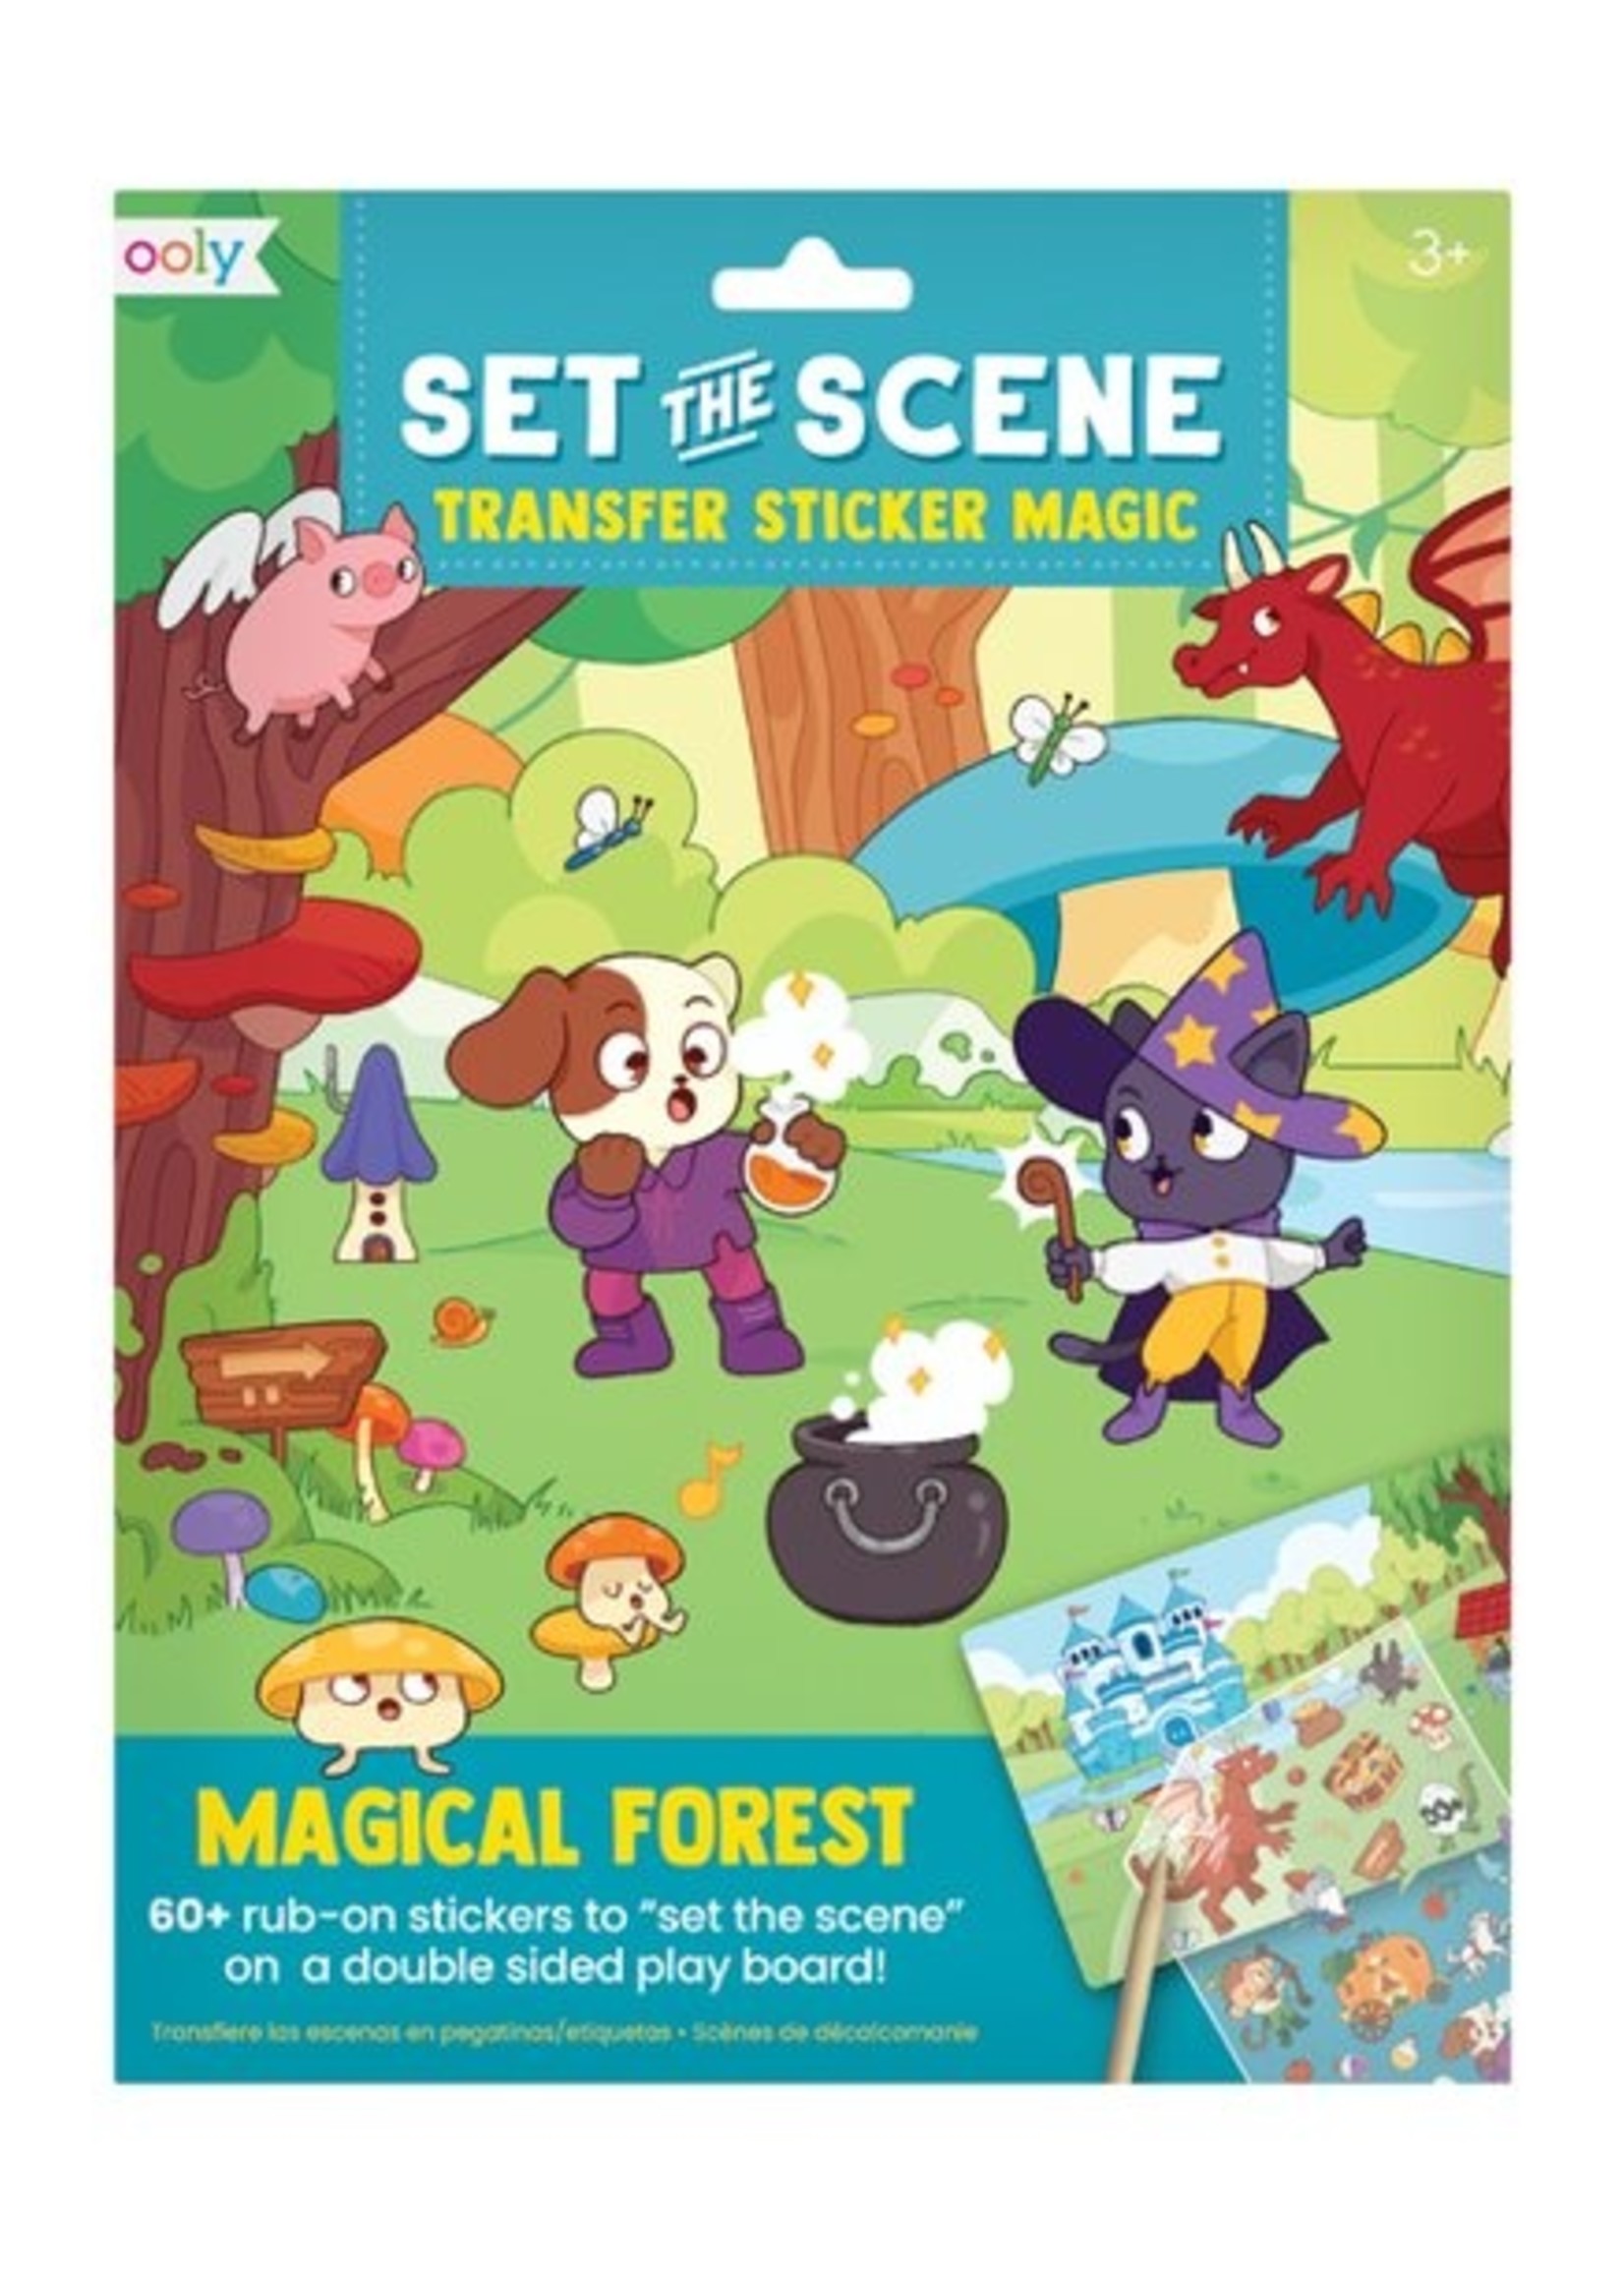 OOLY Set The Scene Transfer Stickers Magic - Magical Forest